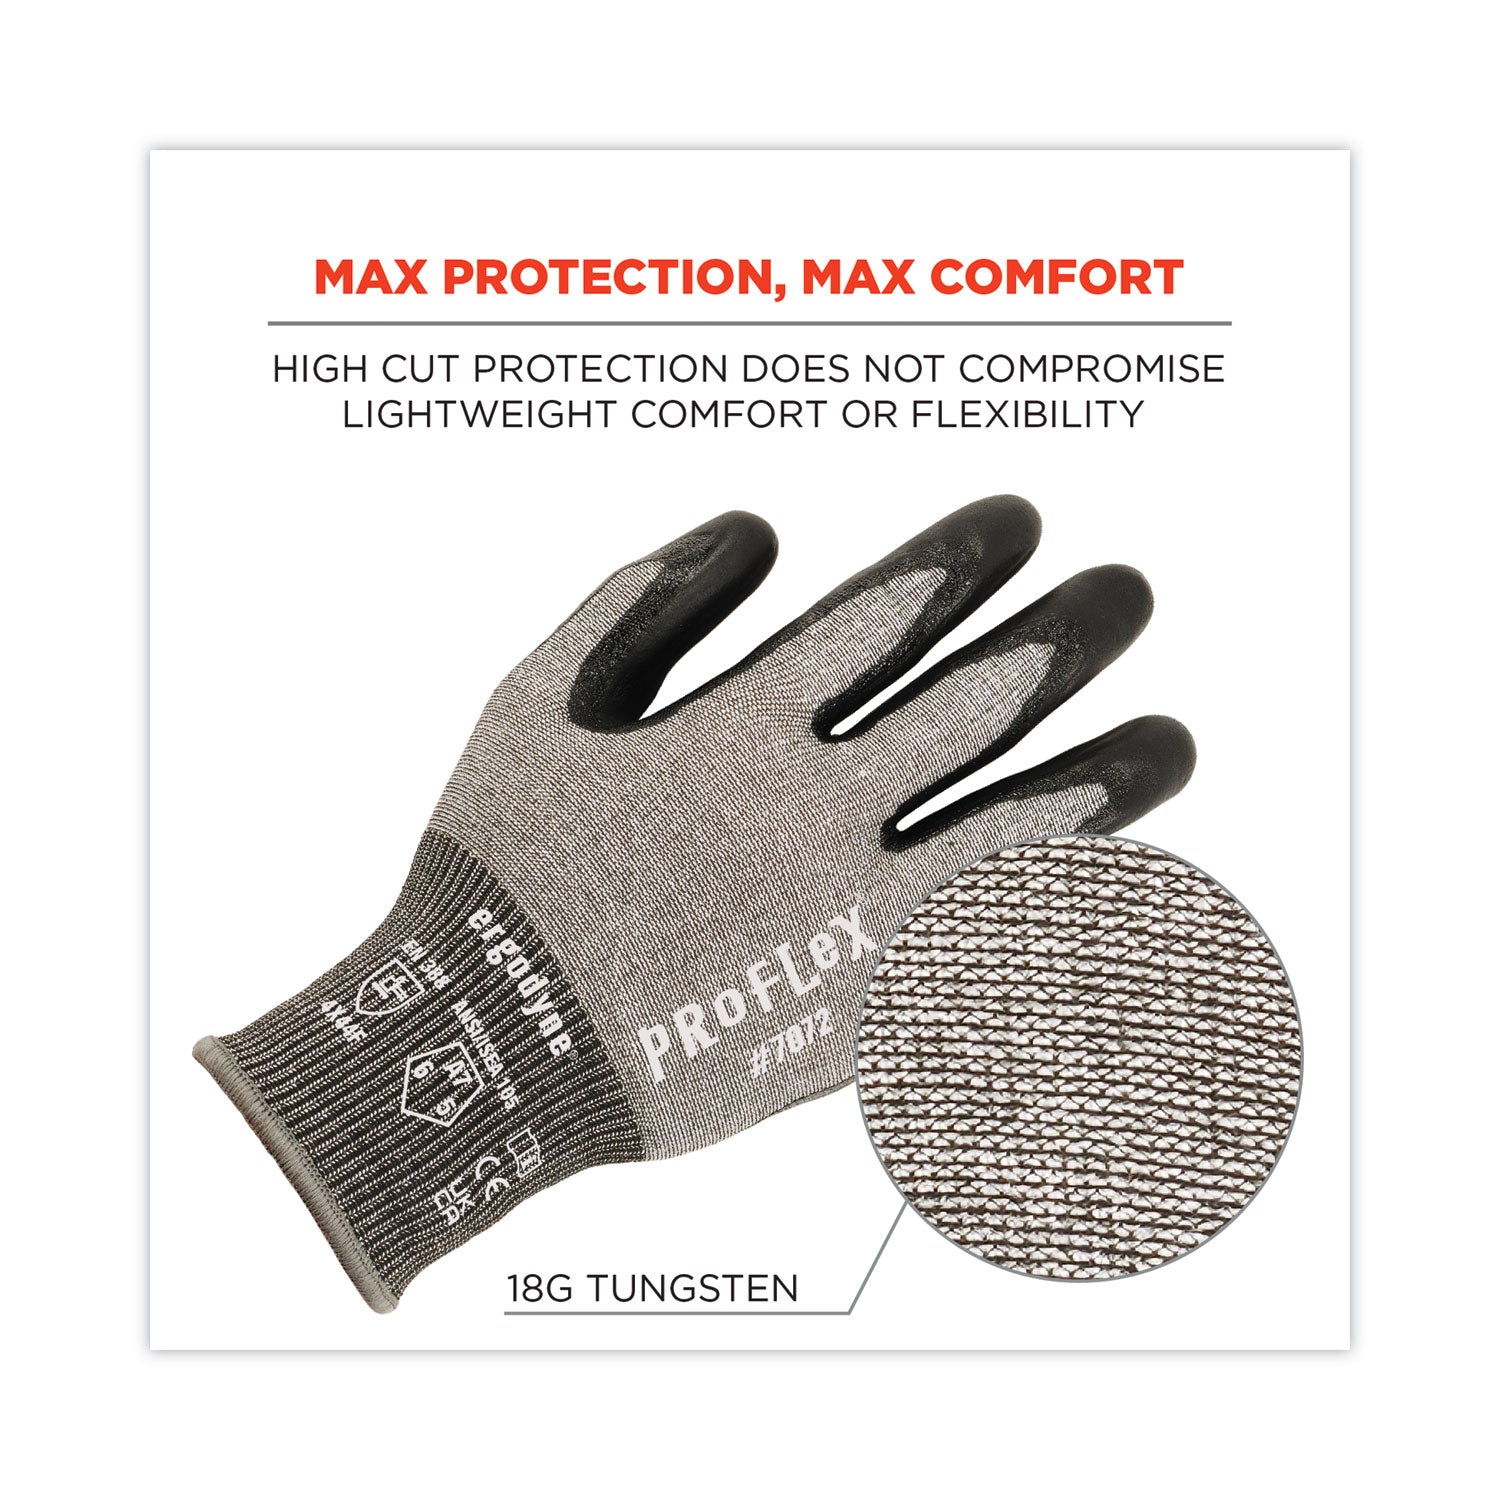 proflex-7072-ansi-a7-nitrile-coated-cr-gloves-gray-large-12-pairs-pack-ships-in-1-3-business-days_ego10304 - 8